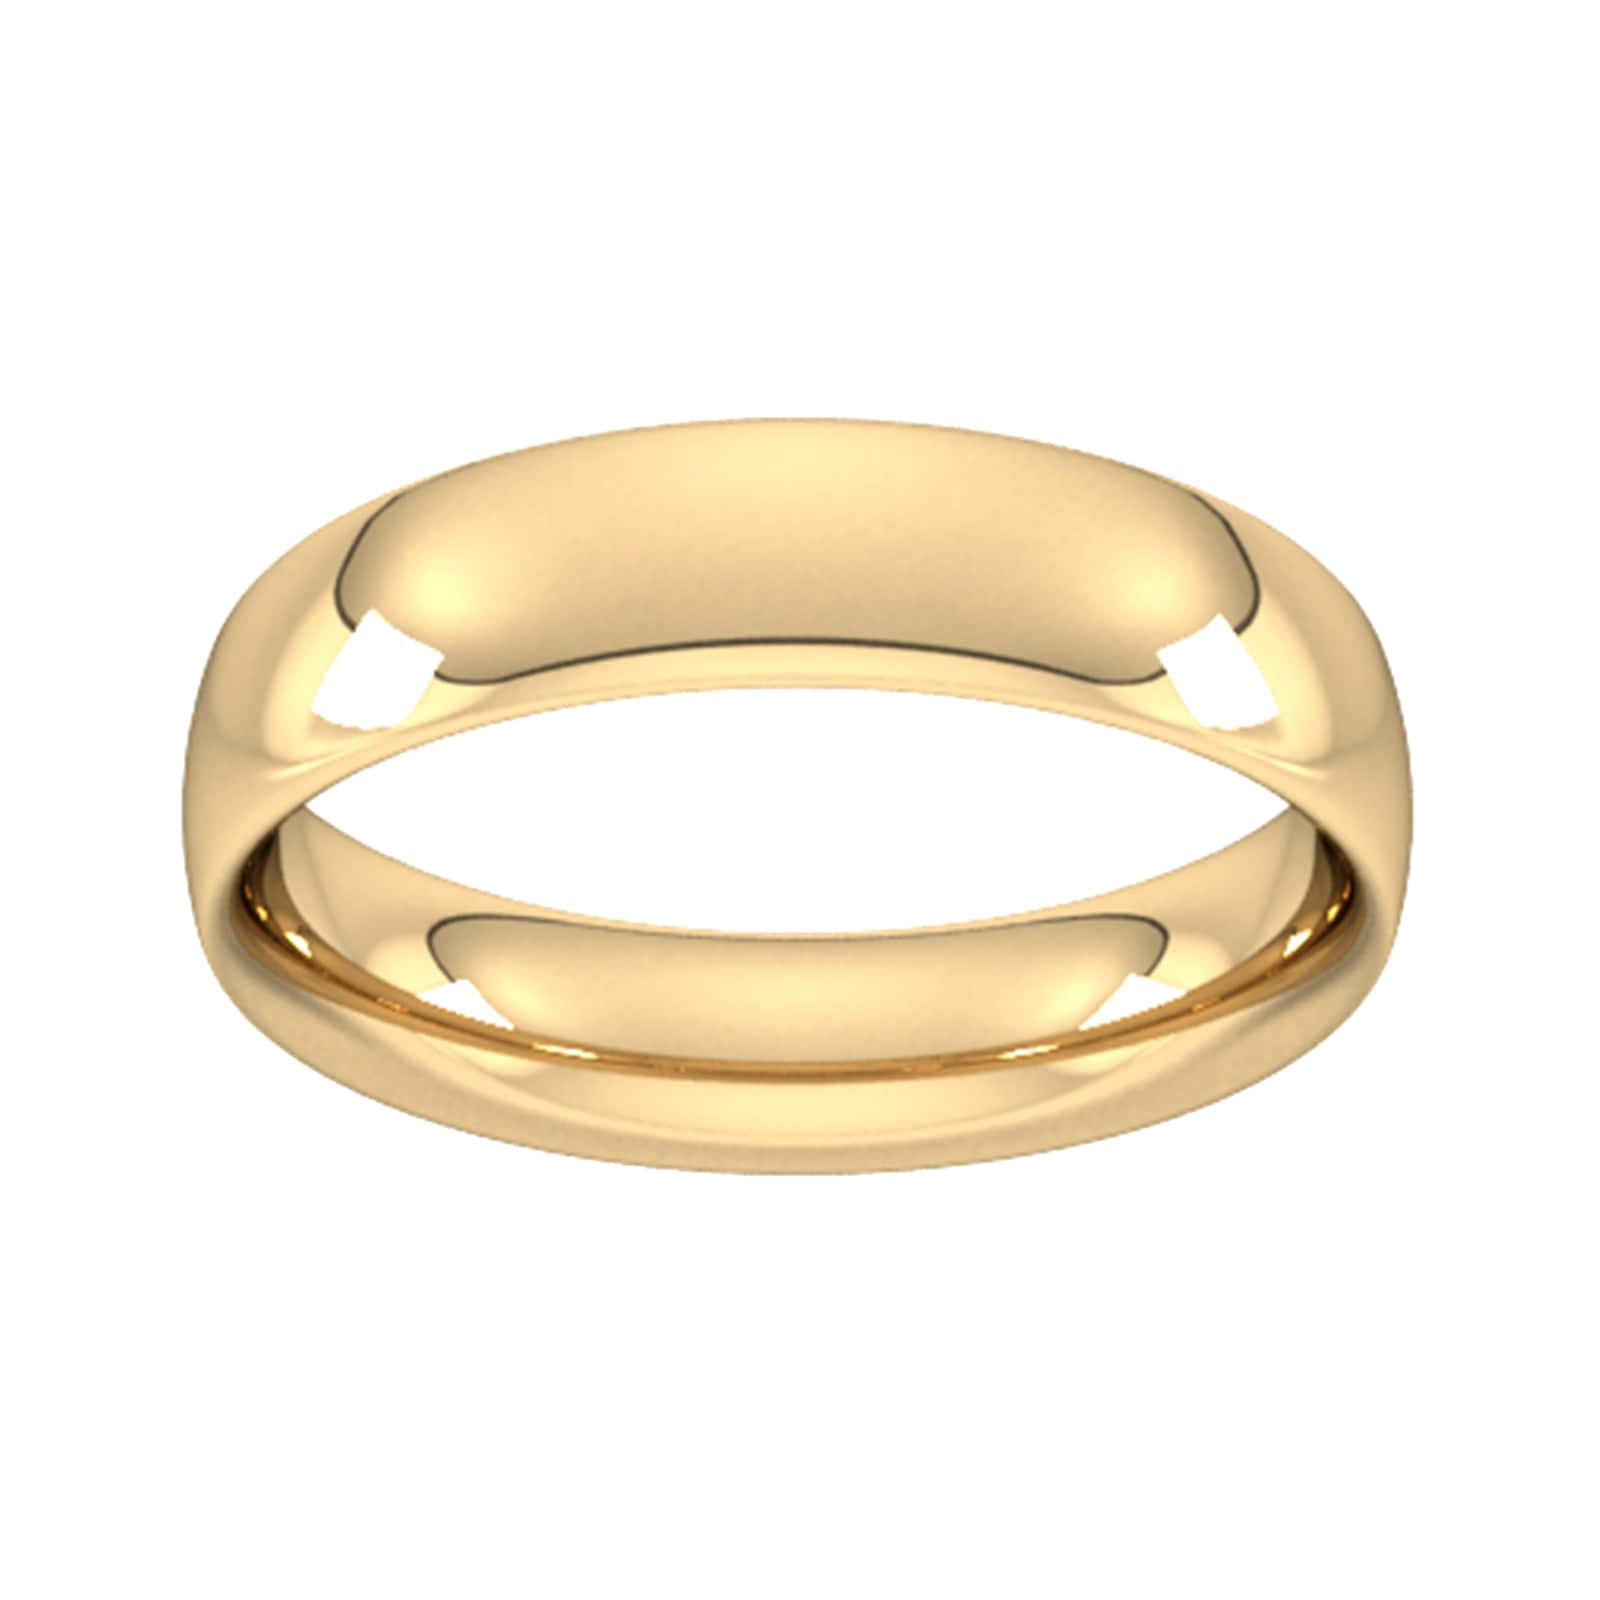 5mm Traditional Court Heavy Wedding Ring In 18 Carat Yellow Gold - Ring Size I